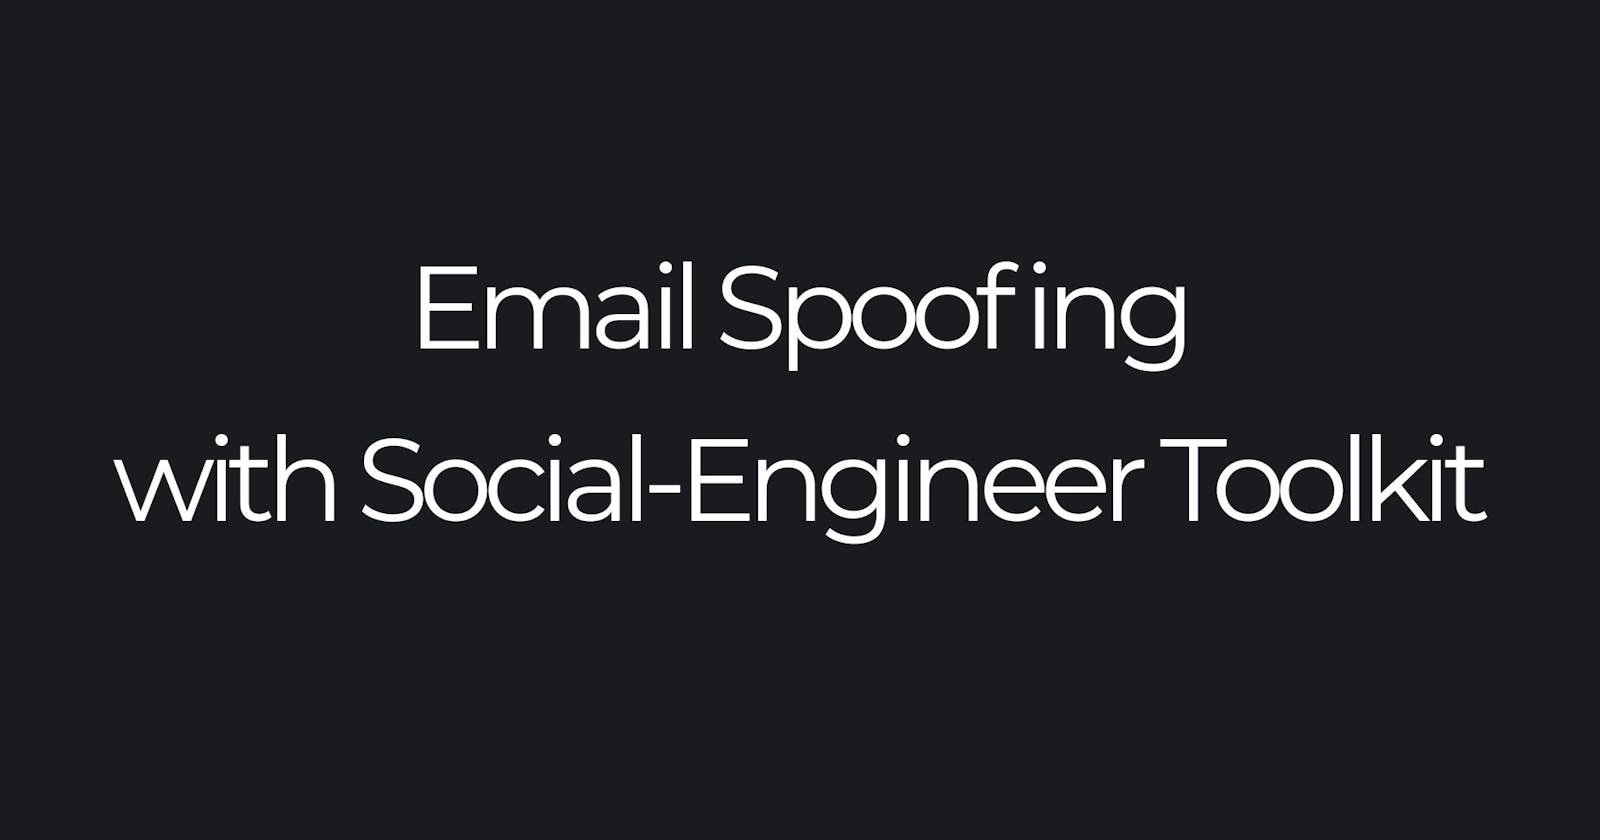 How does email spoofing work?